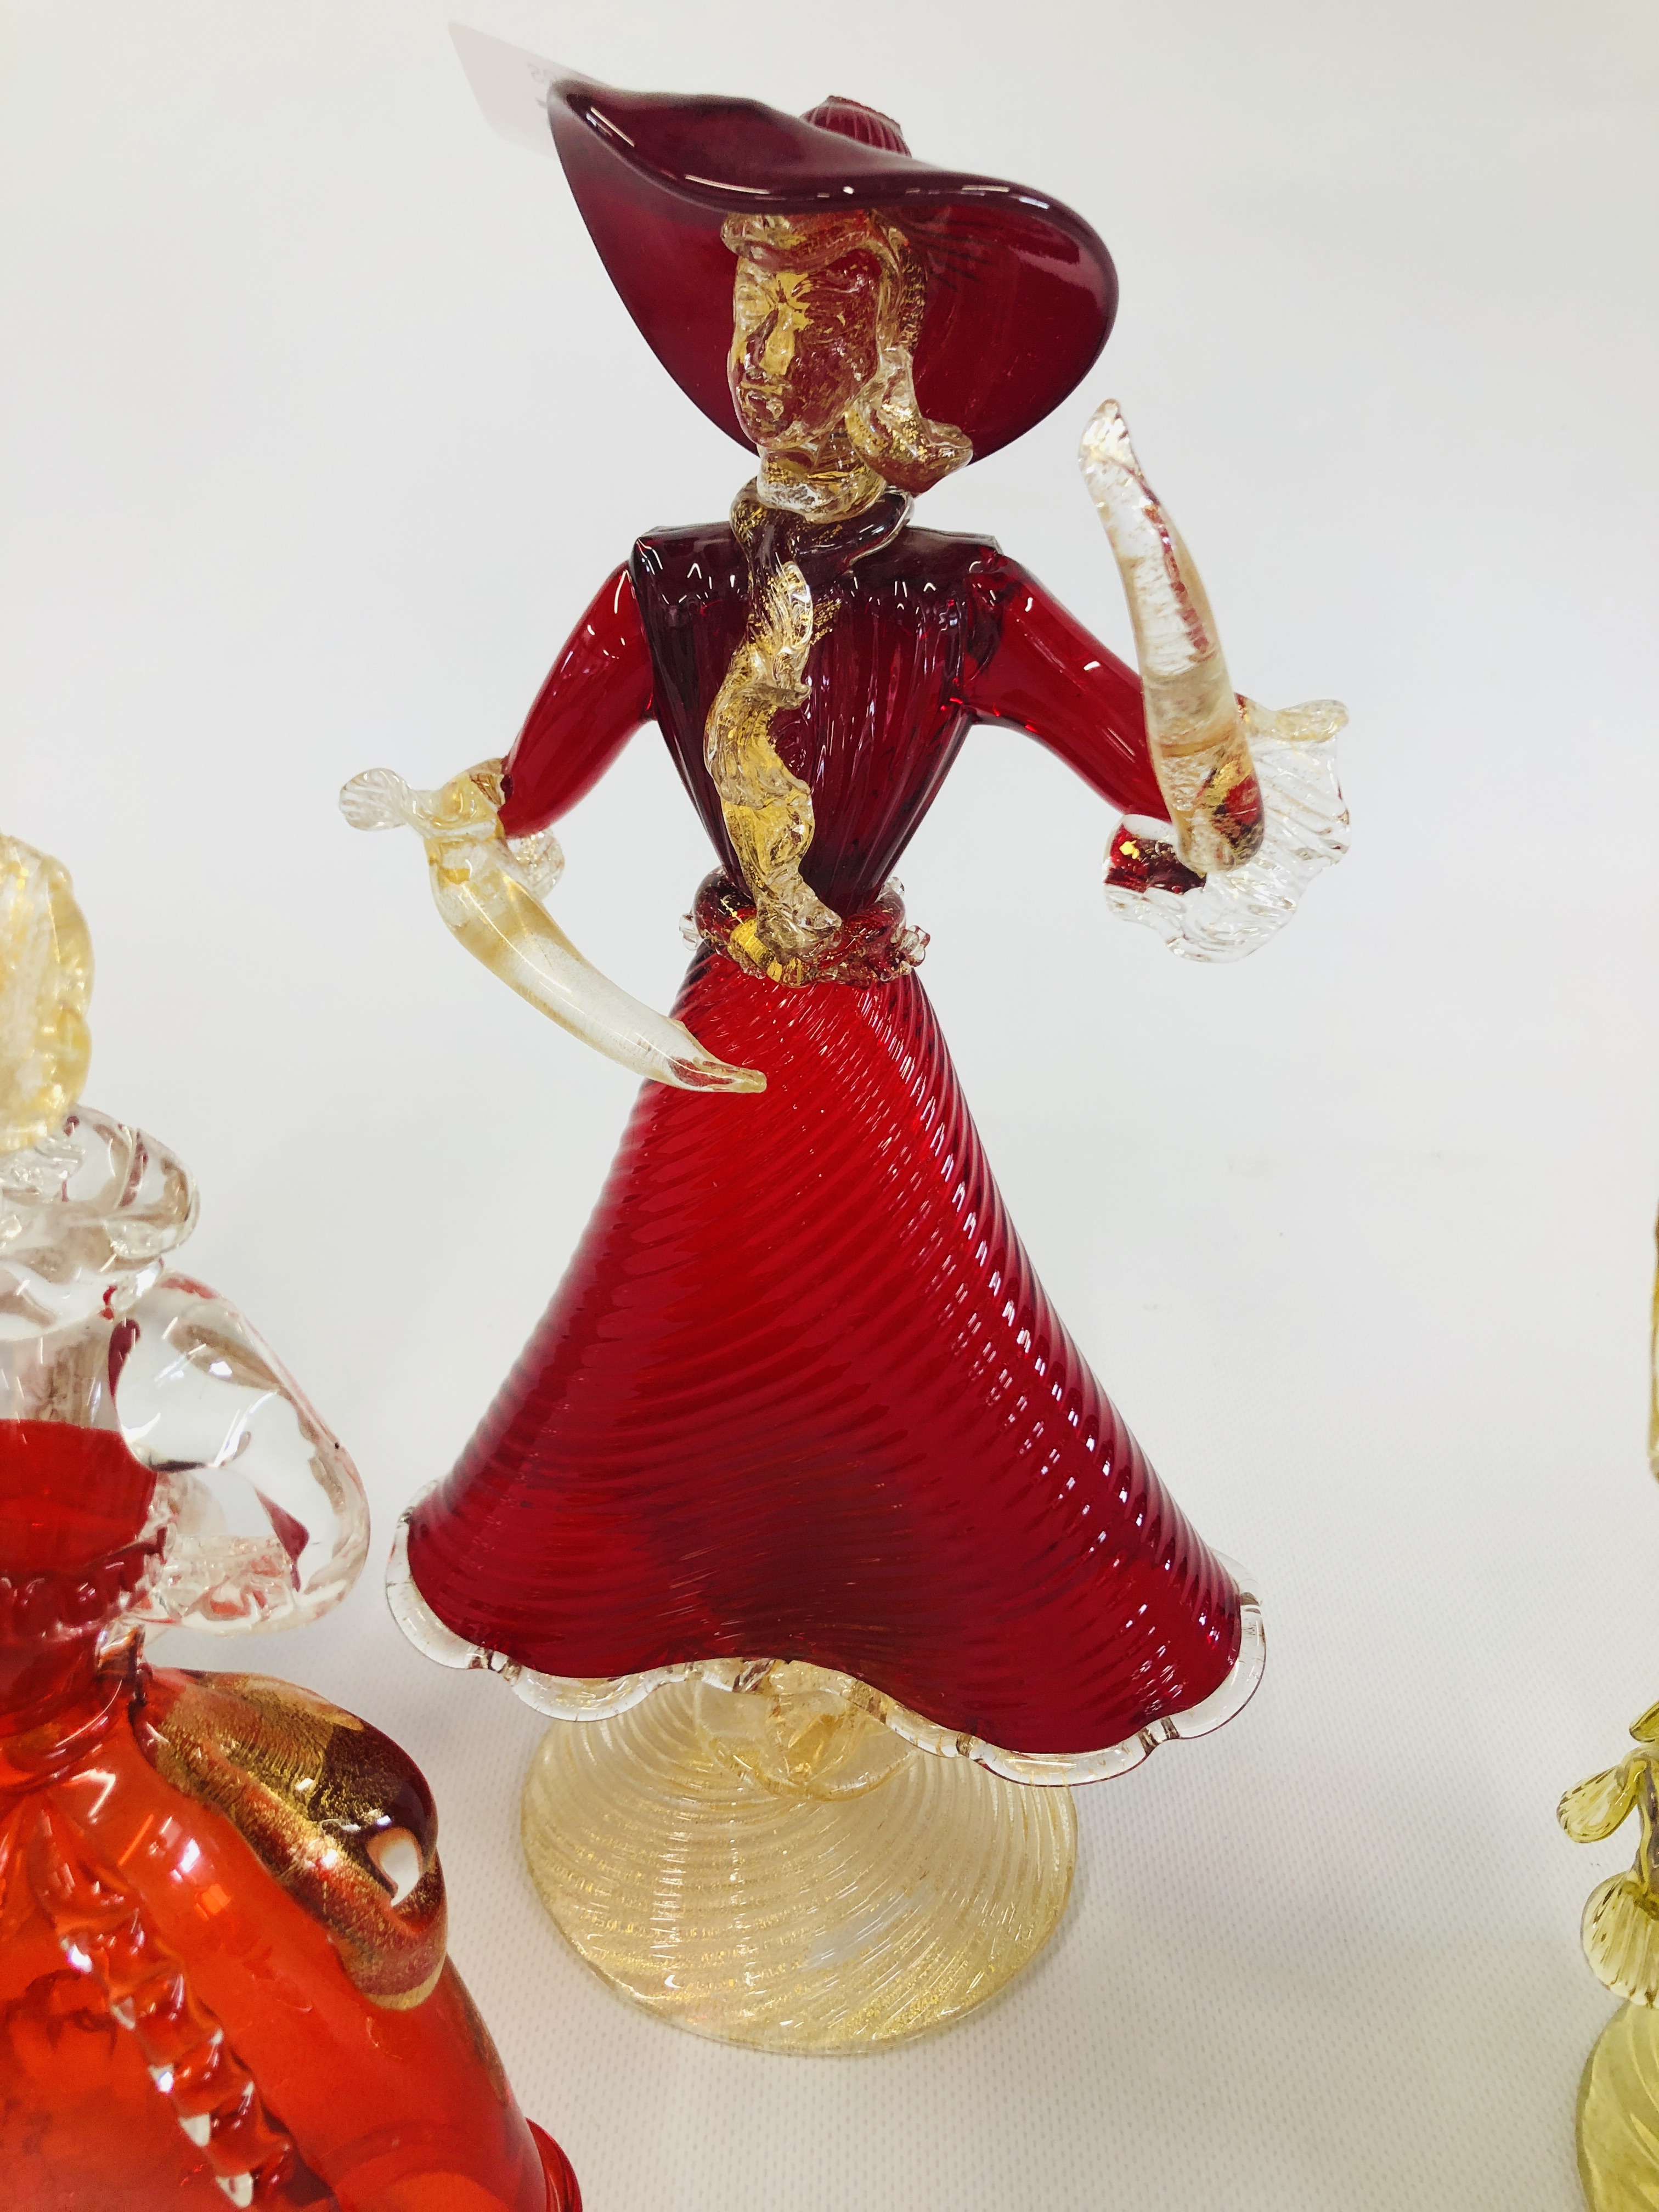 5 MURANO GLASS FIGURES APPROX H 29CM. - Image 4 of 7